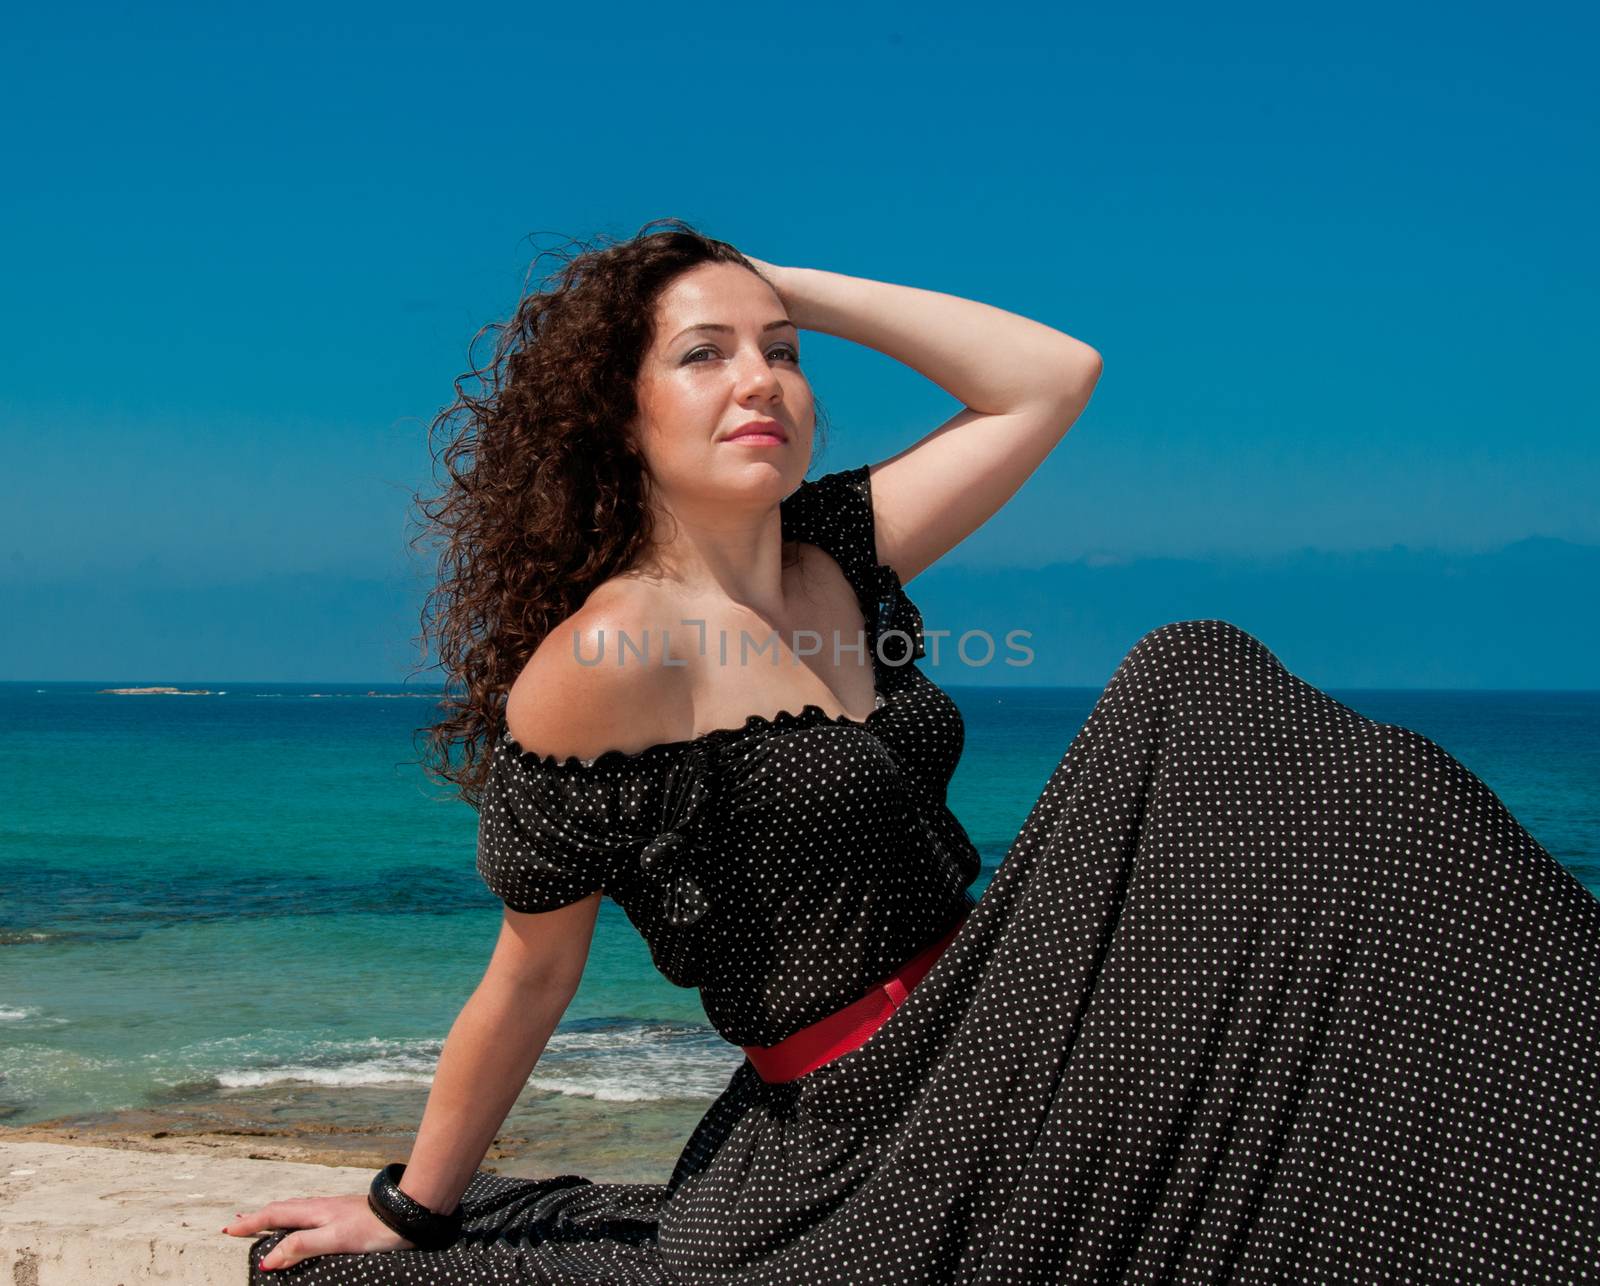 Young, beautiful woman in a black  dress with white polka dots posing against the sea